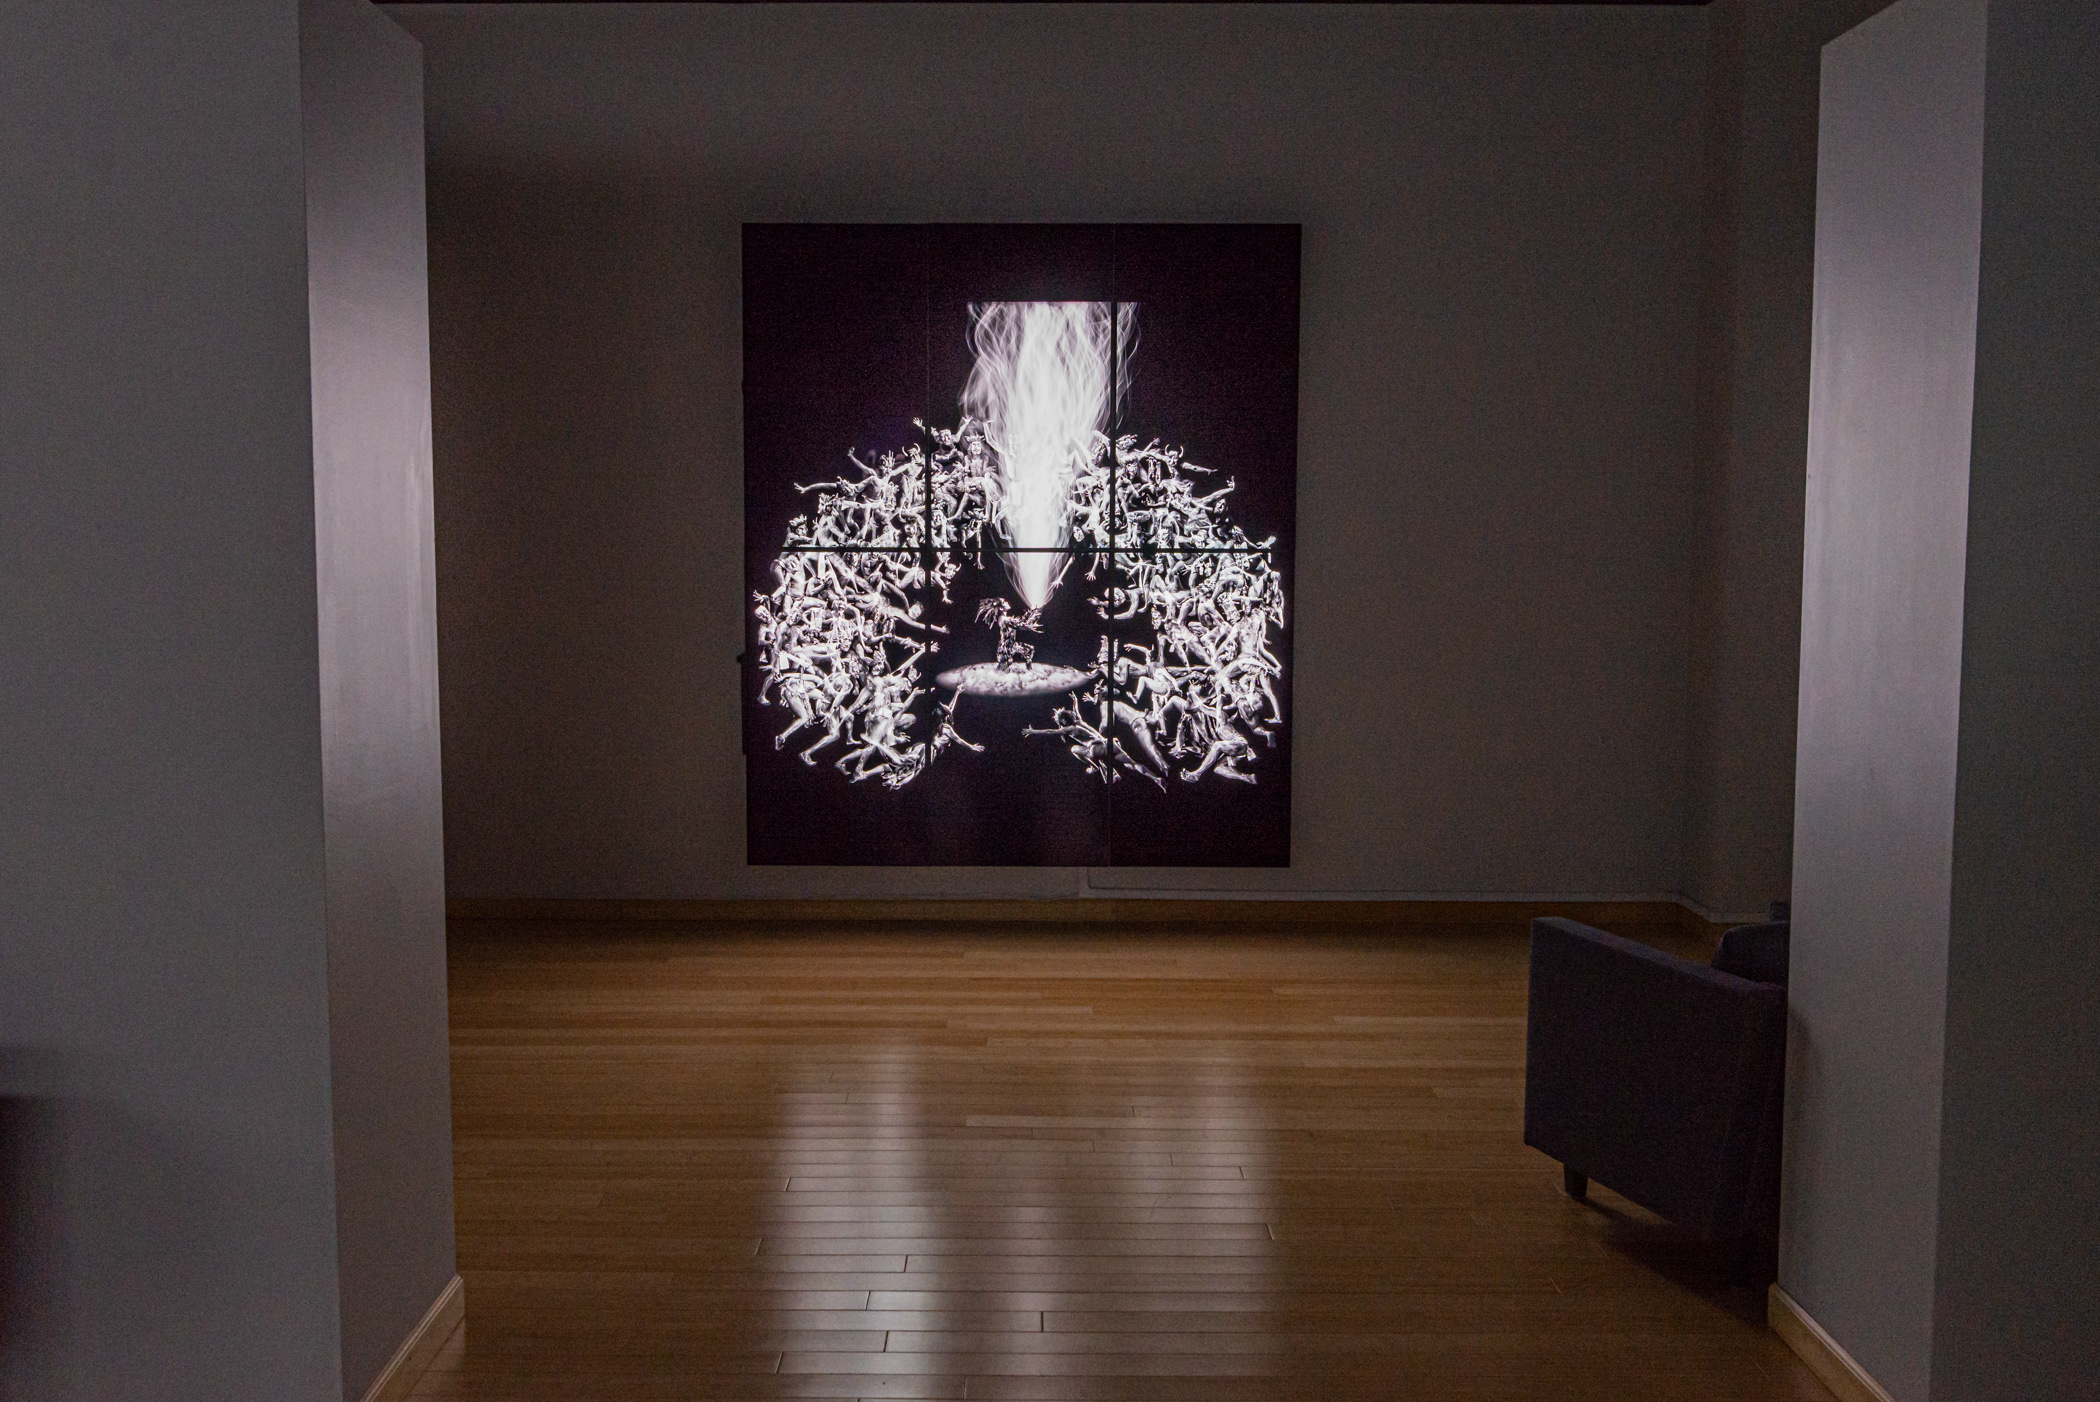 Clarise, six-Panel OLED installation, photographic imagery on 5:00 video loop